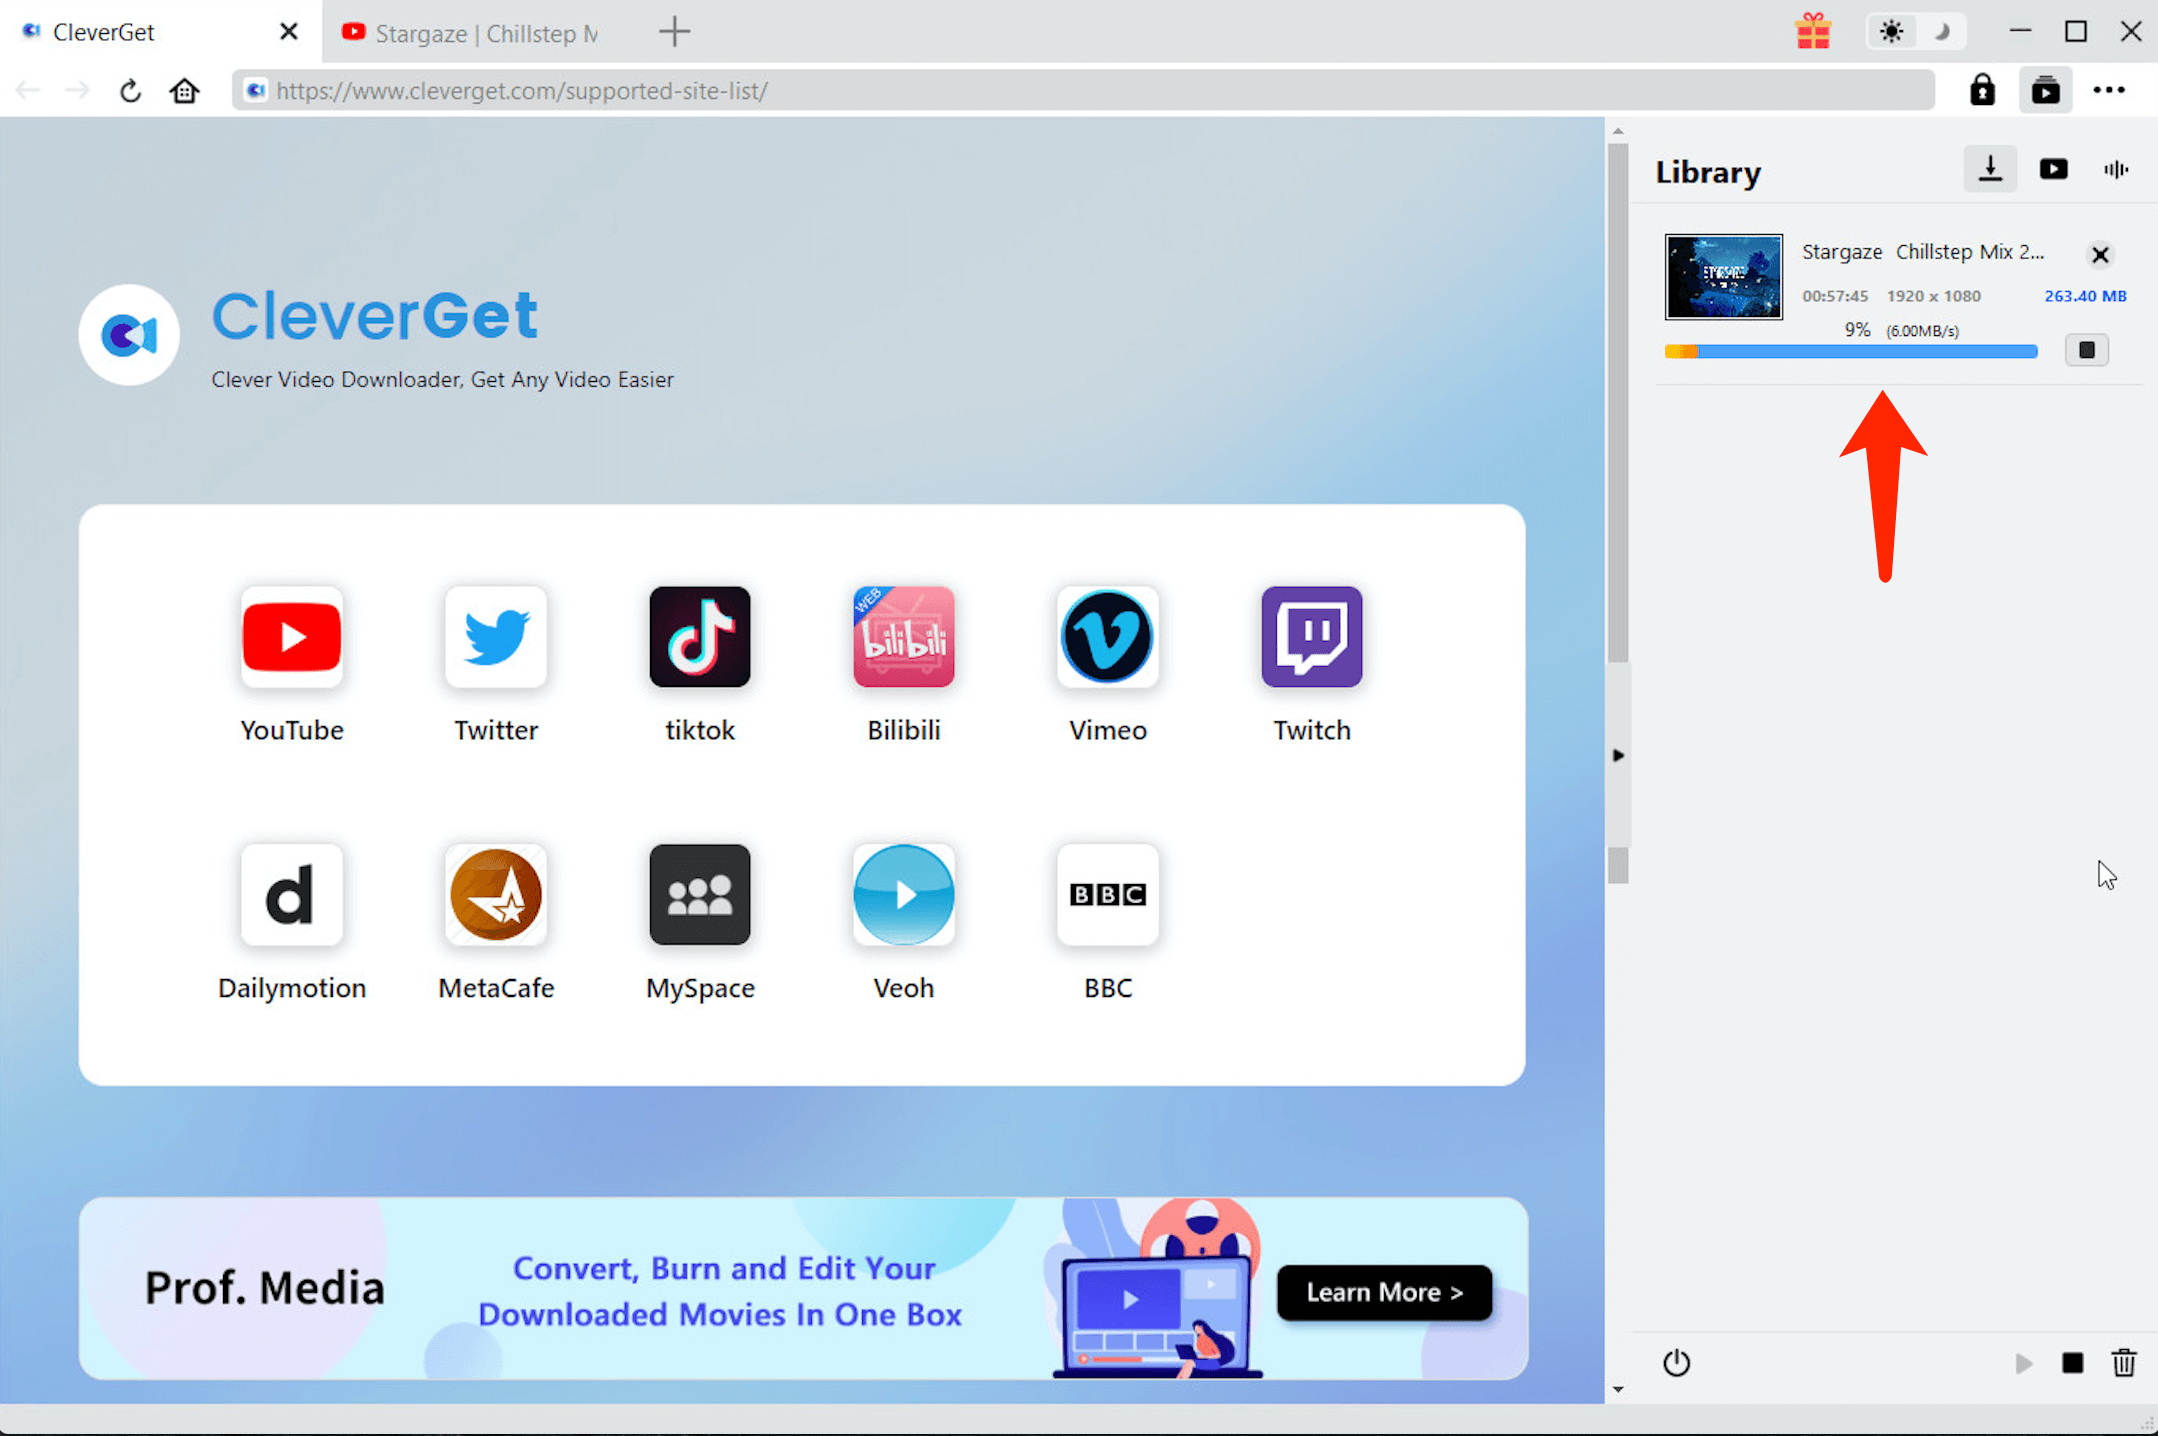  Download-MegaShare-movies-with-CleverGet 